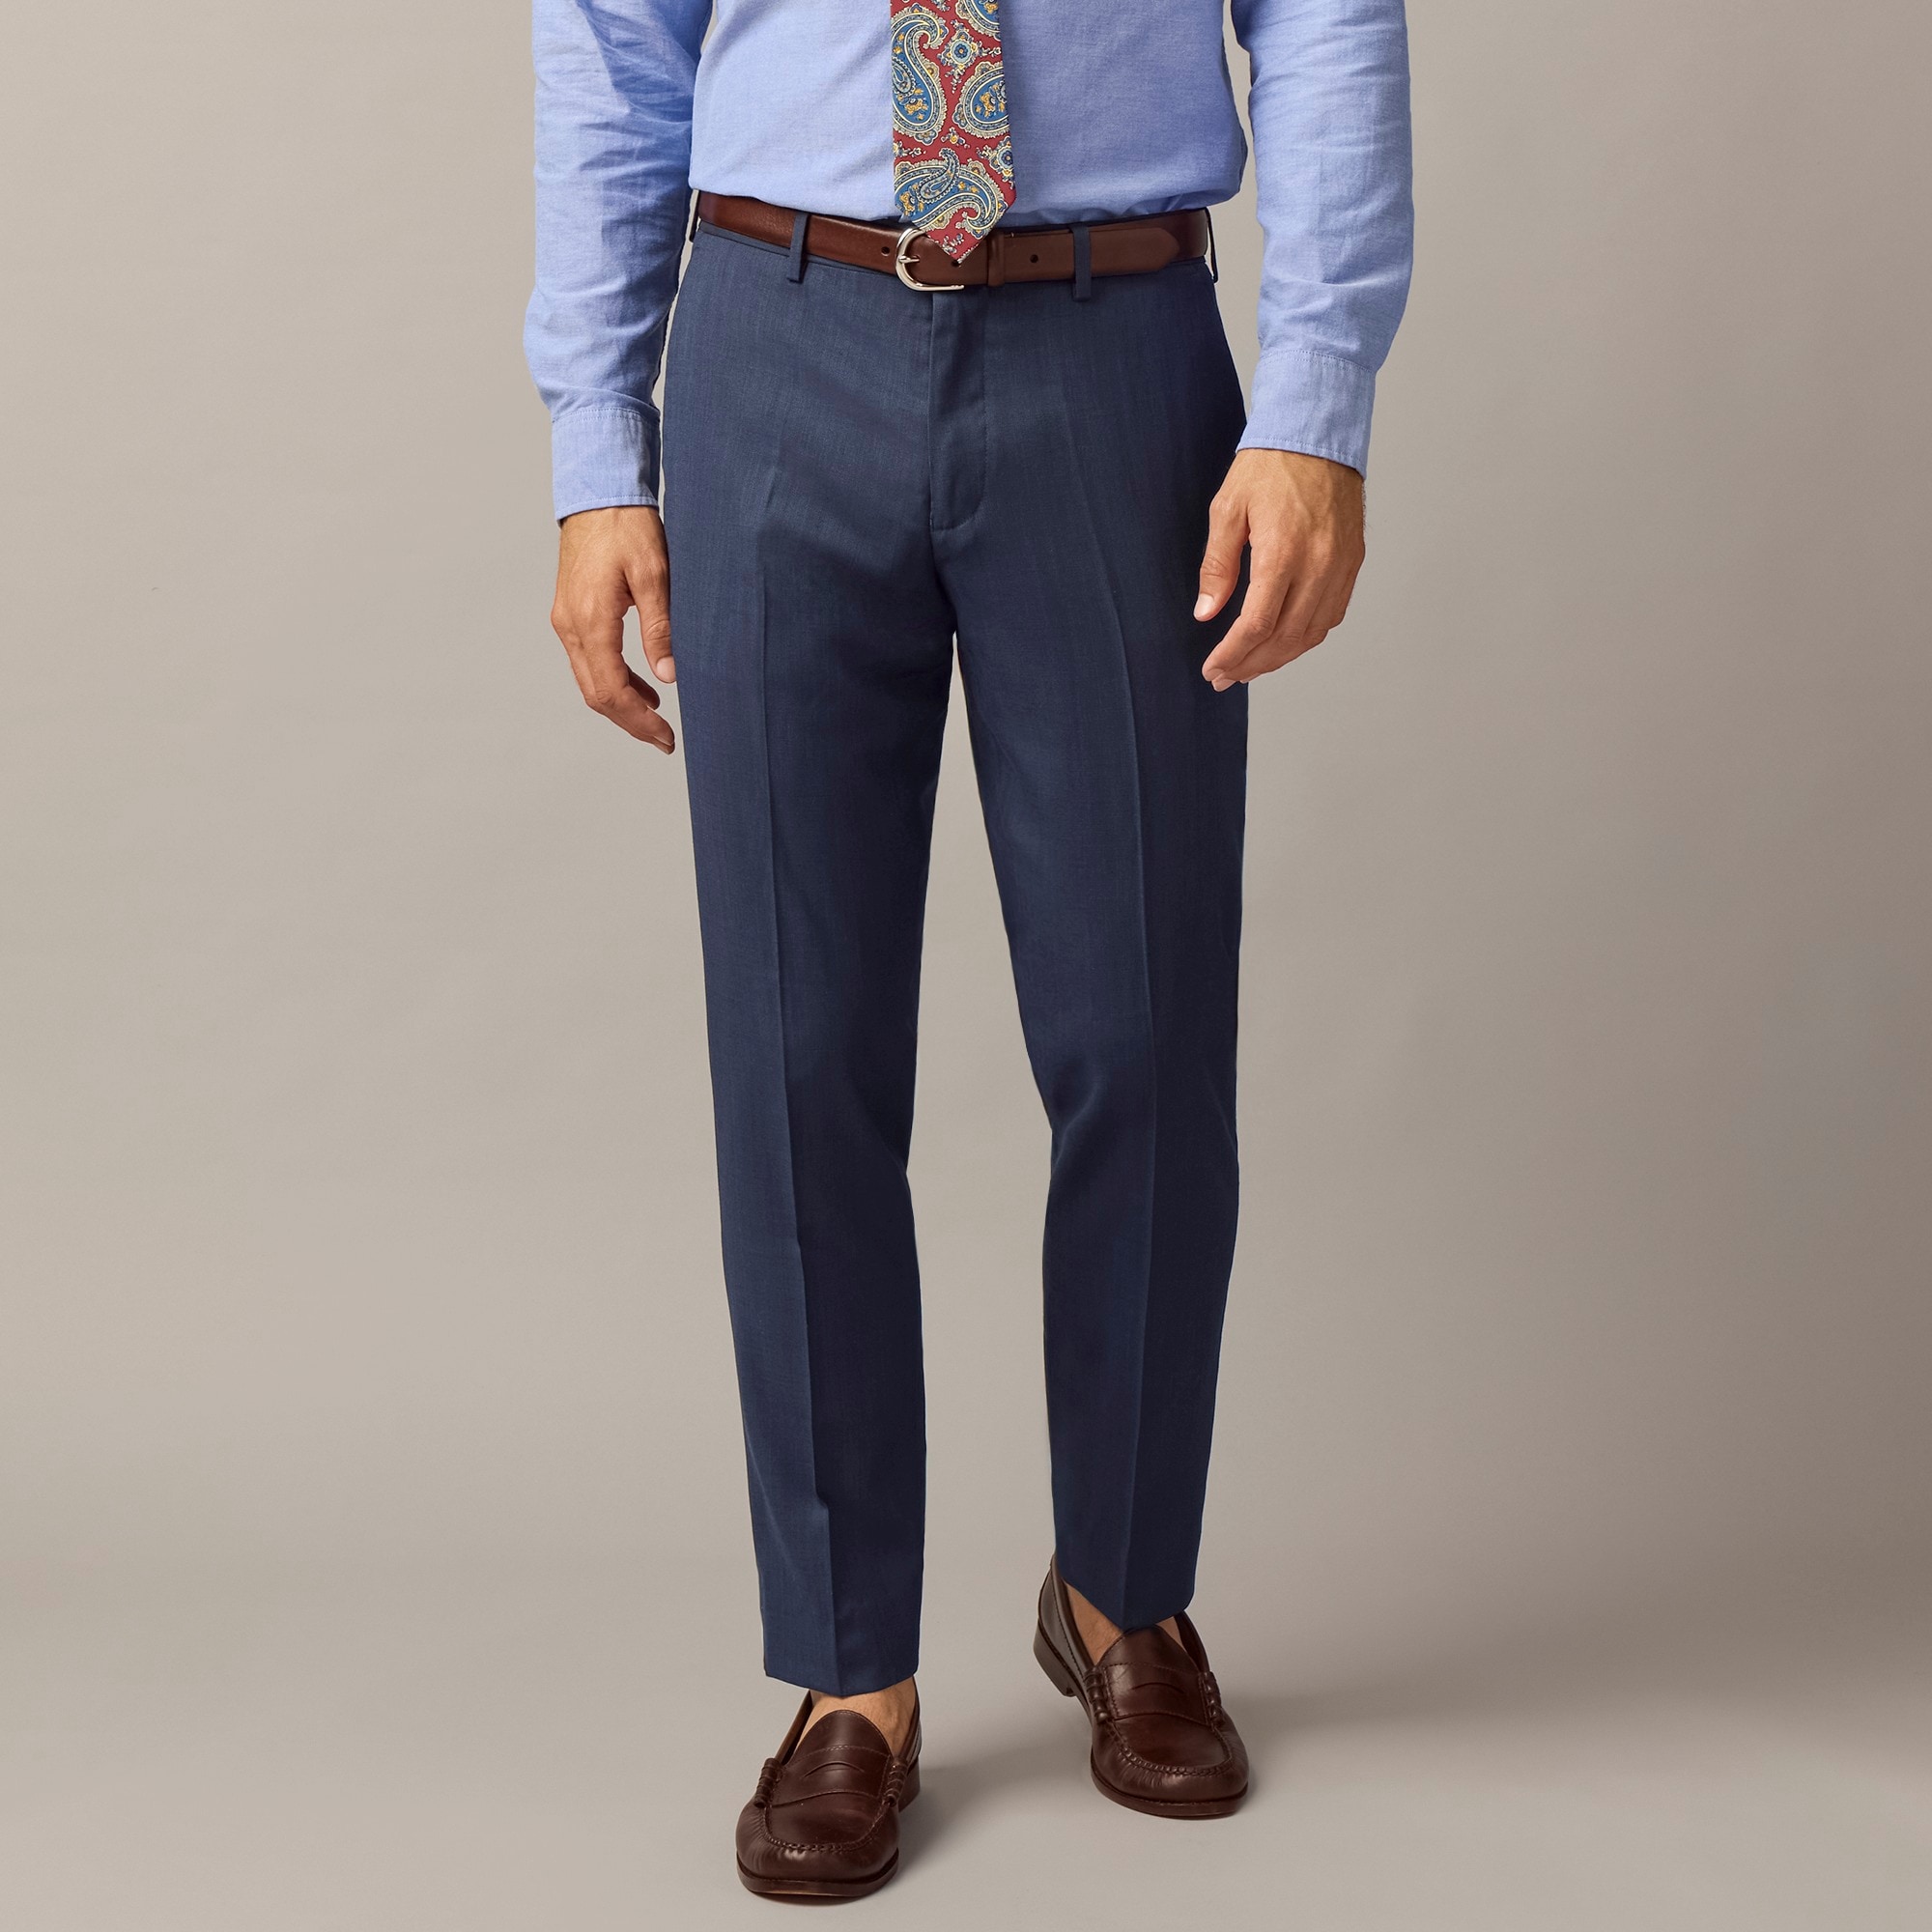 Jcrew Ludlow Slim-fit suit pant in Italian stretch worsted wool